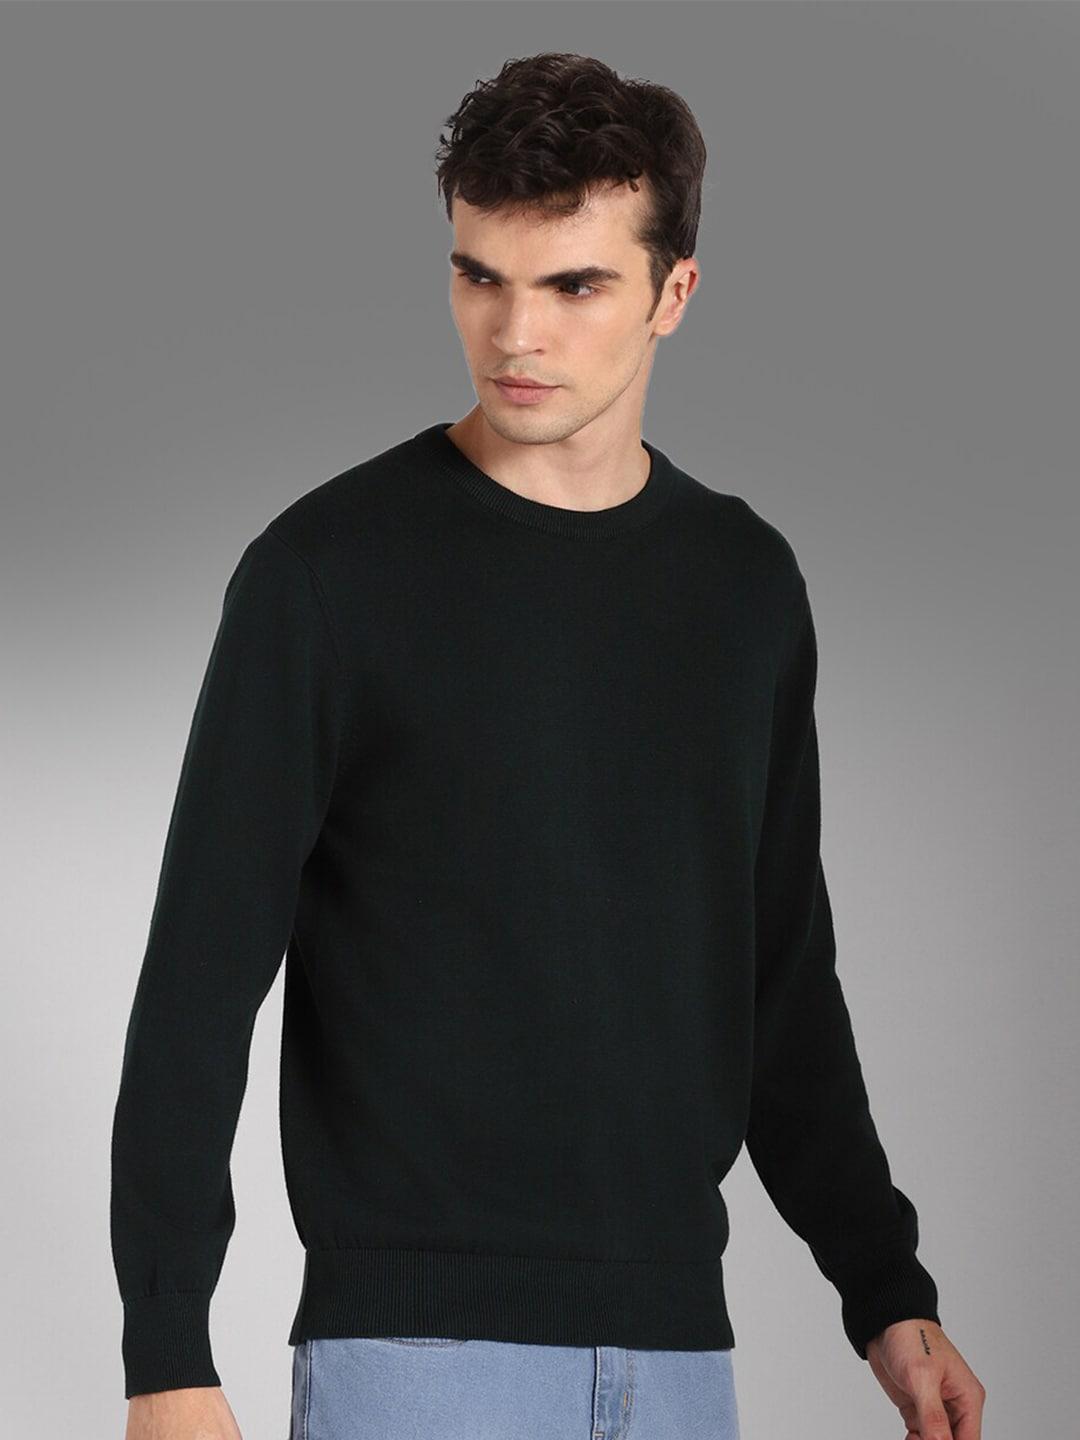 high-star-round-neck-long-sleeves-cotton-pullover-sweater